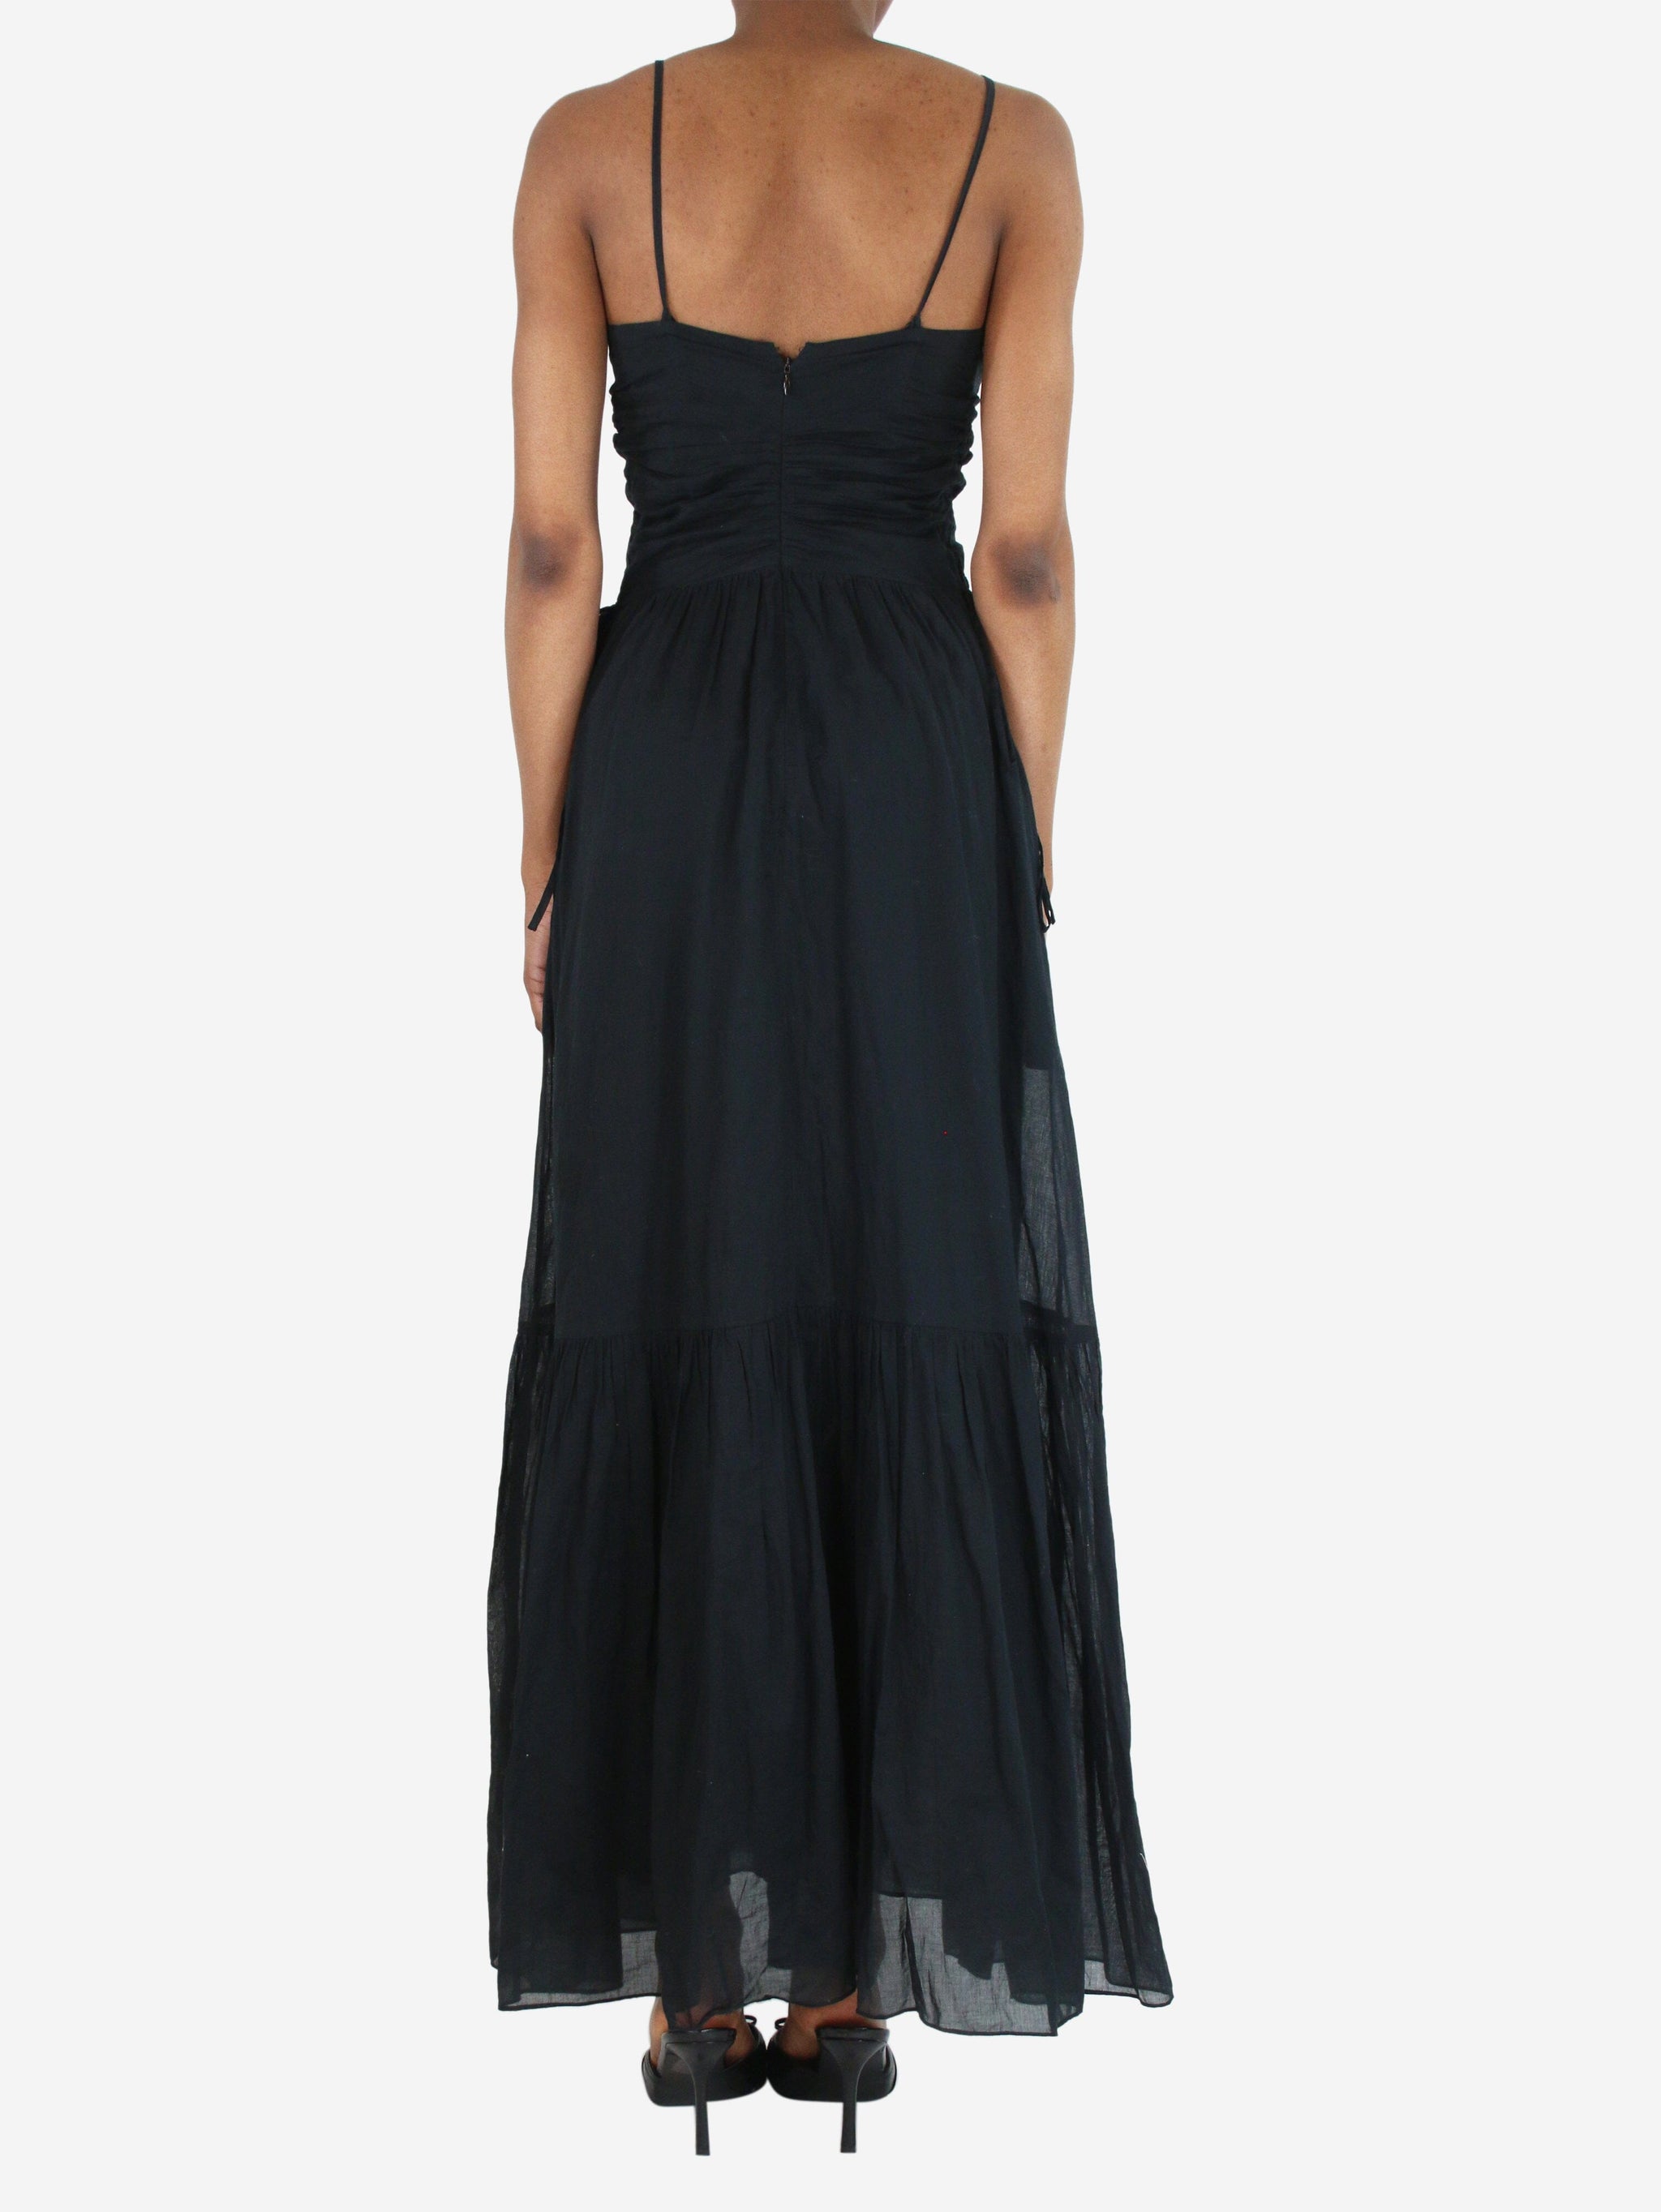 Isabel Marant Etoile pre-owned black tiered maxi dress | Sign of the Times